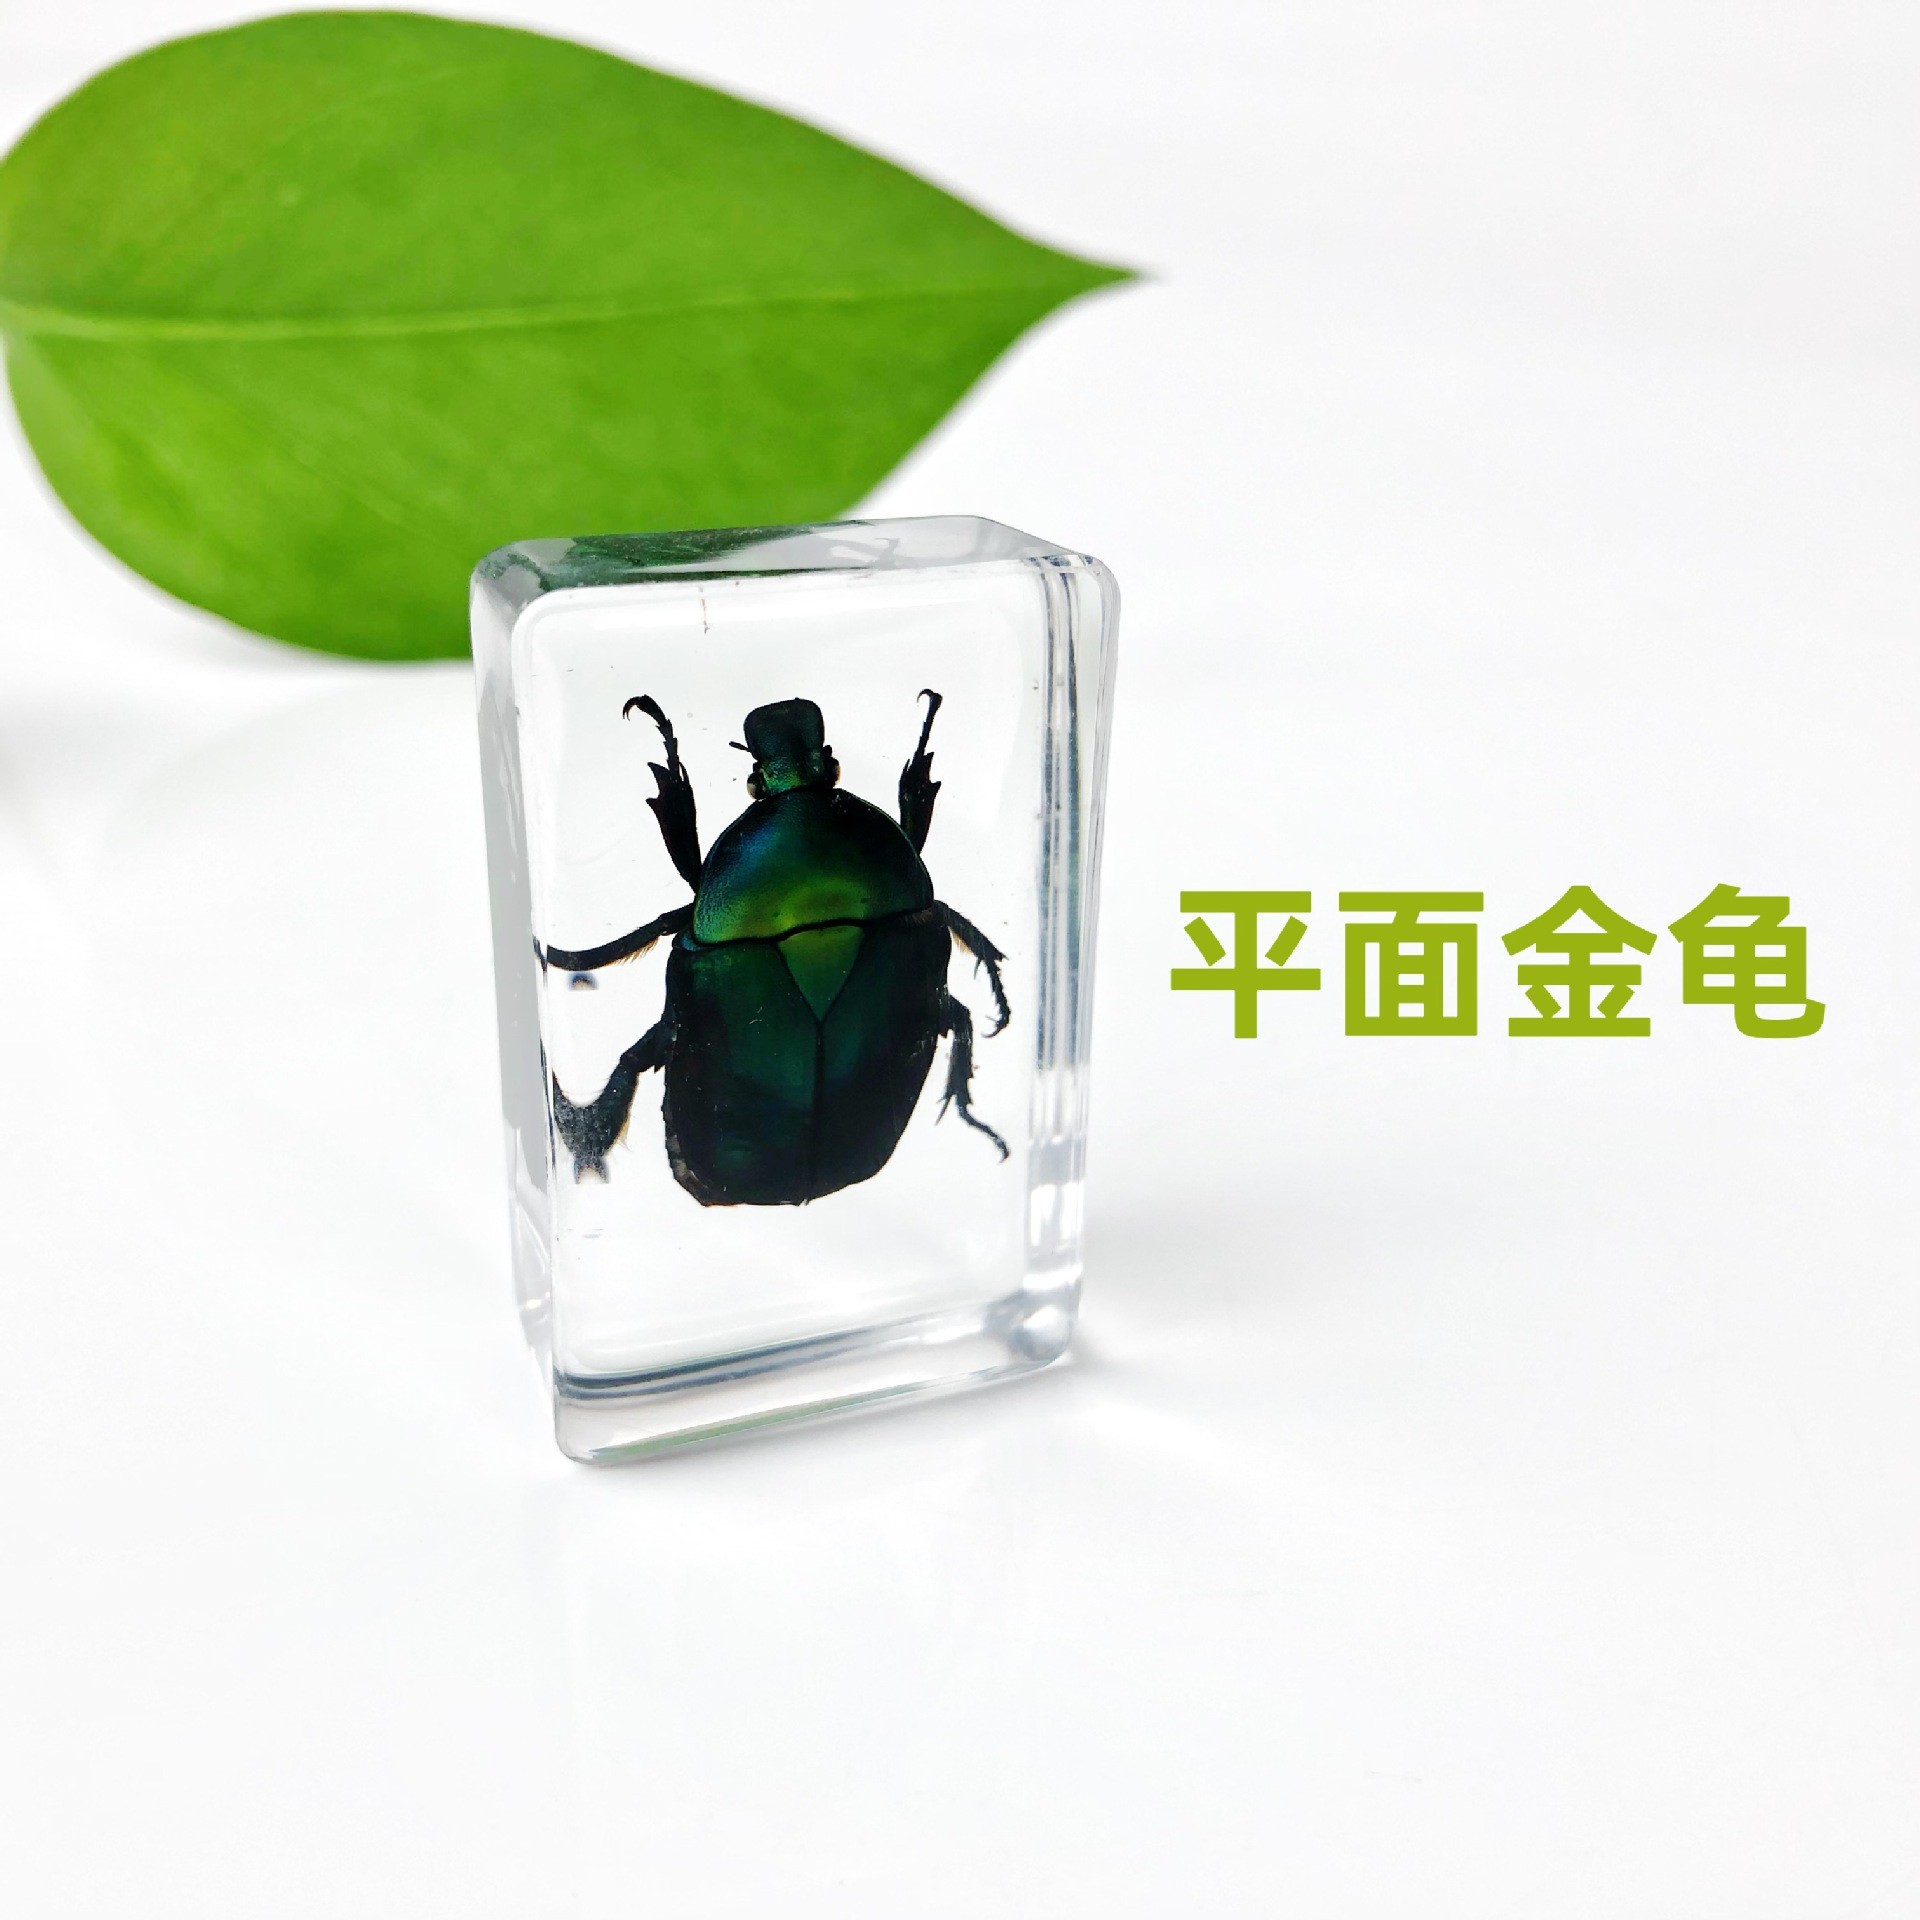 Insect Amber Specimen Science Popularization Teaching Aids Crafts Insect Specimen Preschool Education Inquiry Experiment